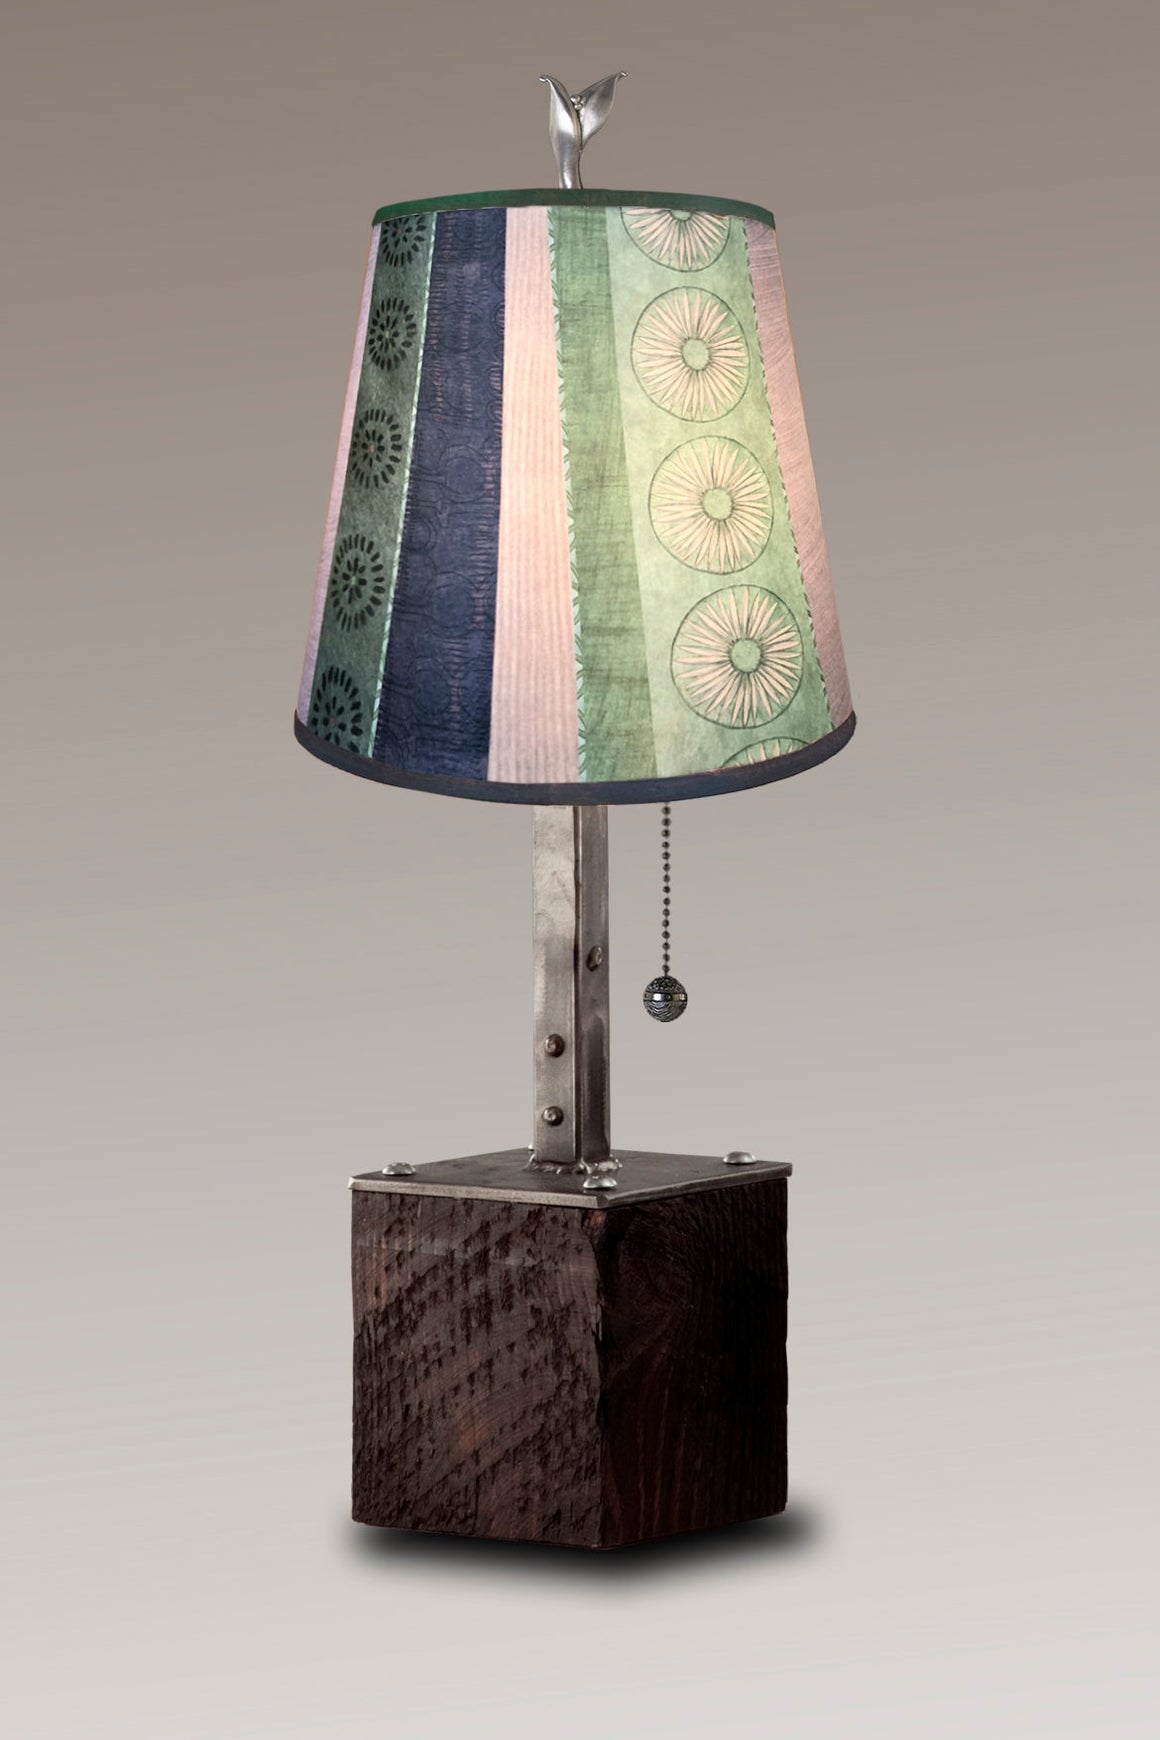 Steel Table Lamp on Reclaimed Wood with Small Drum Shade in Serape Waters